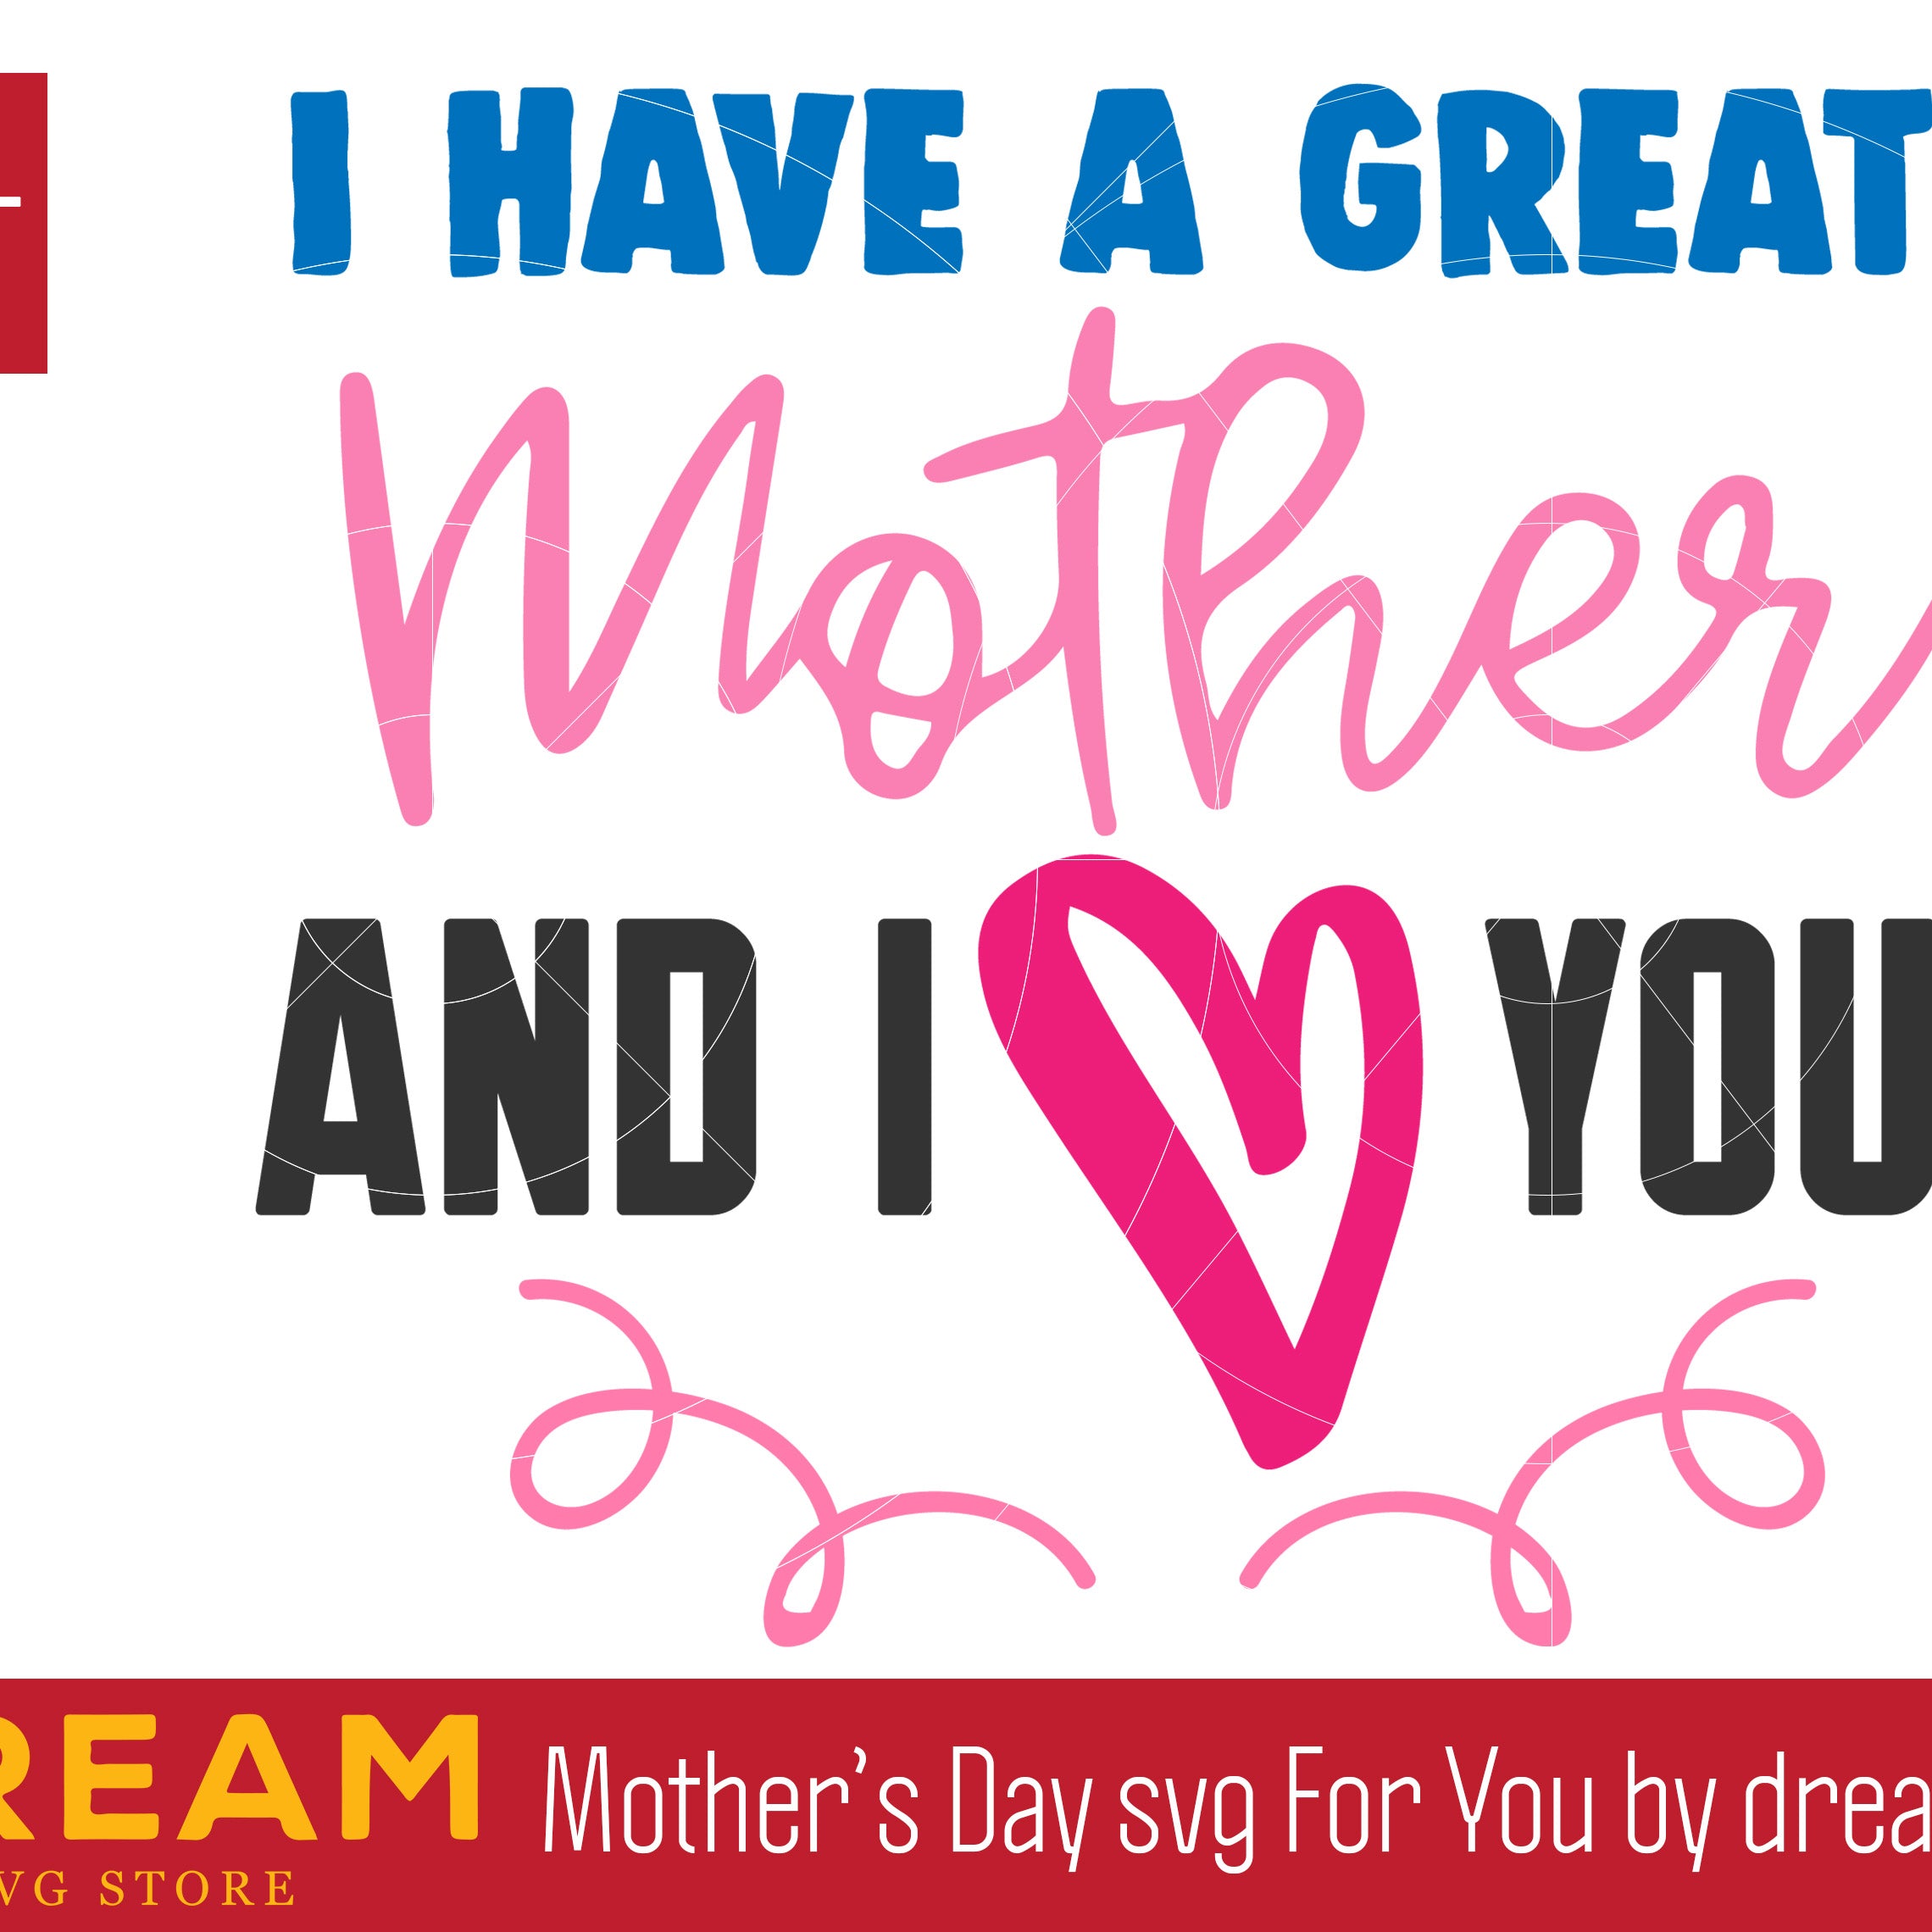 I have a greatest mother and i love you svg, Mother's day svg, eps, png, dxf